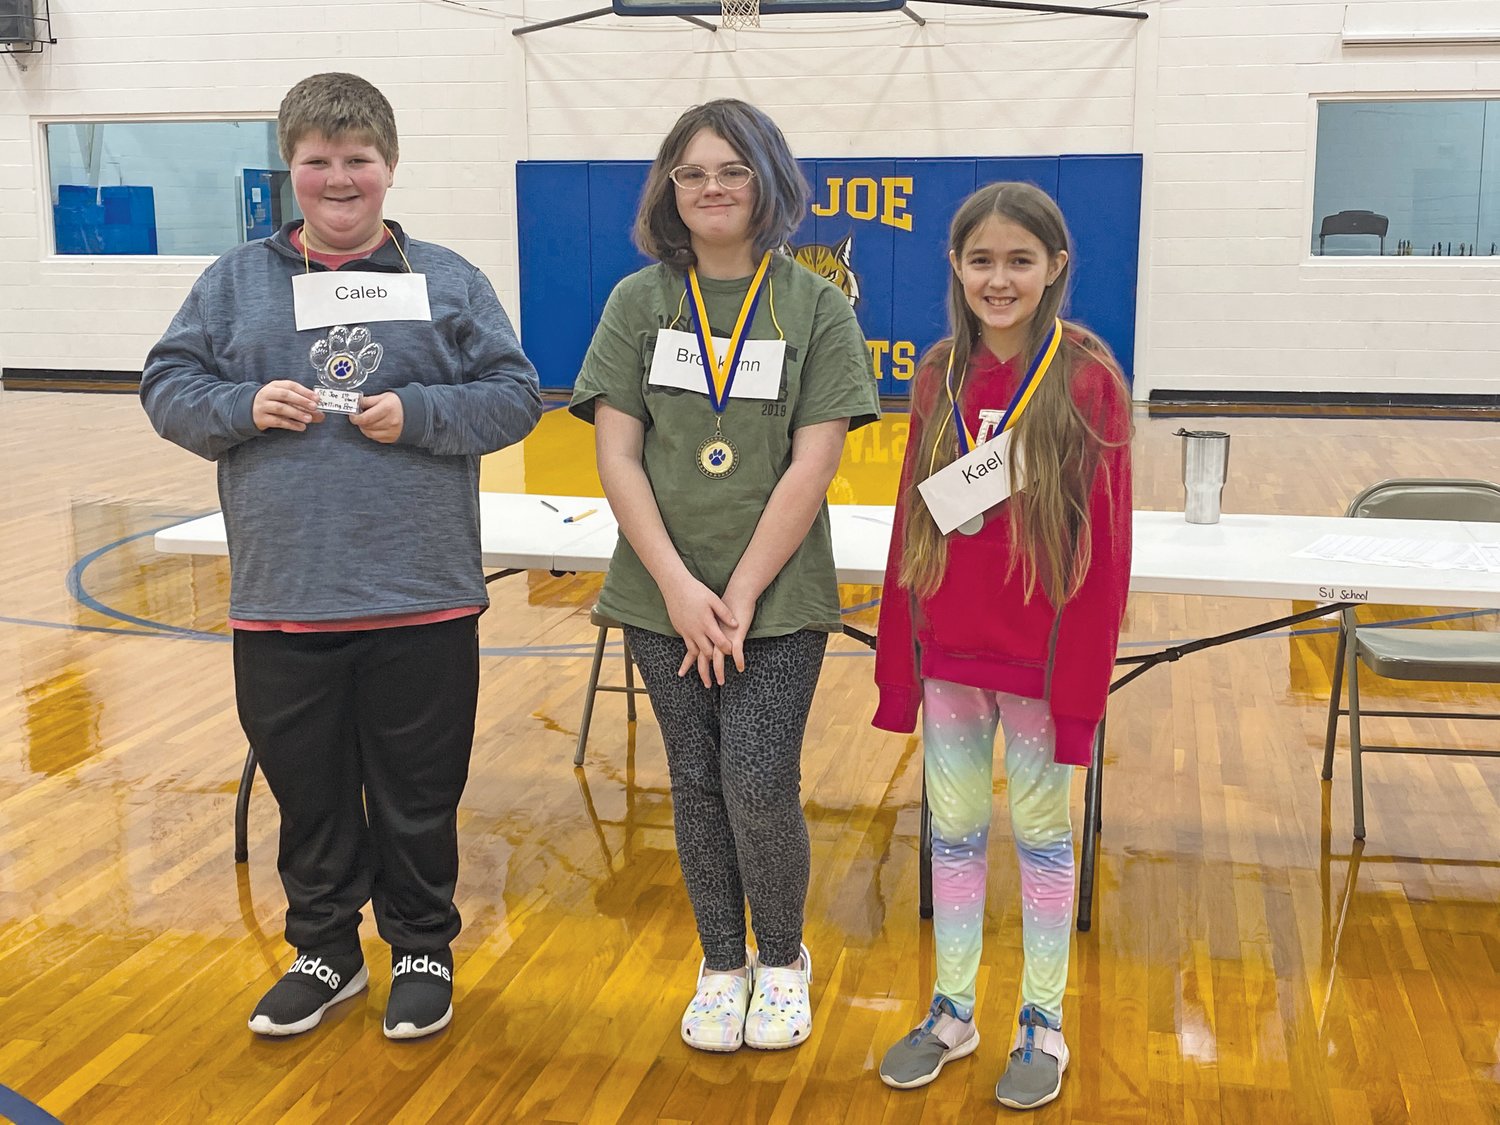 The winners of the St. Joe Spelling Bee are (from left) Caleb Grinder, 1st place; Brooklynn Henson, 2nd place and Kael Reed, 3rd place.